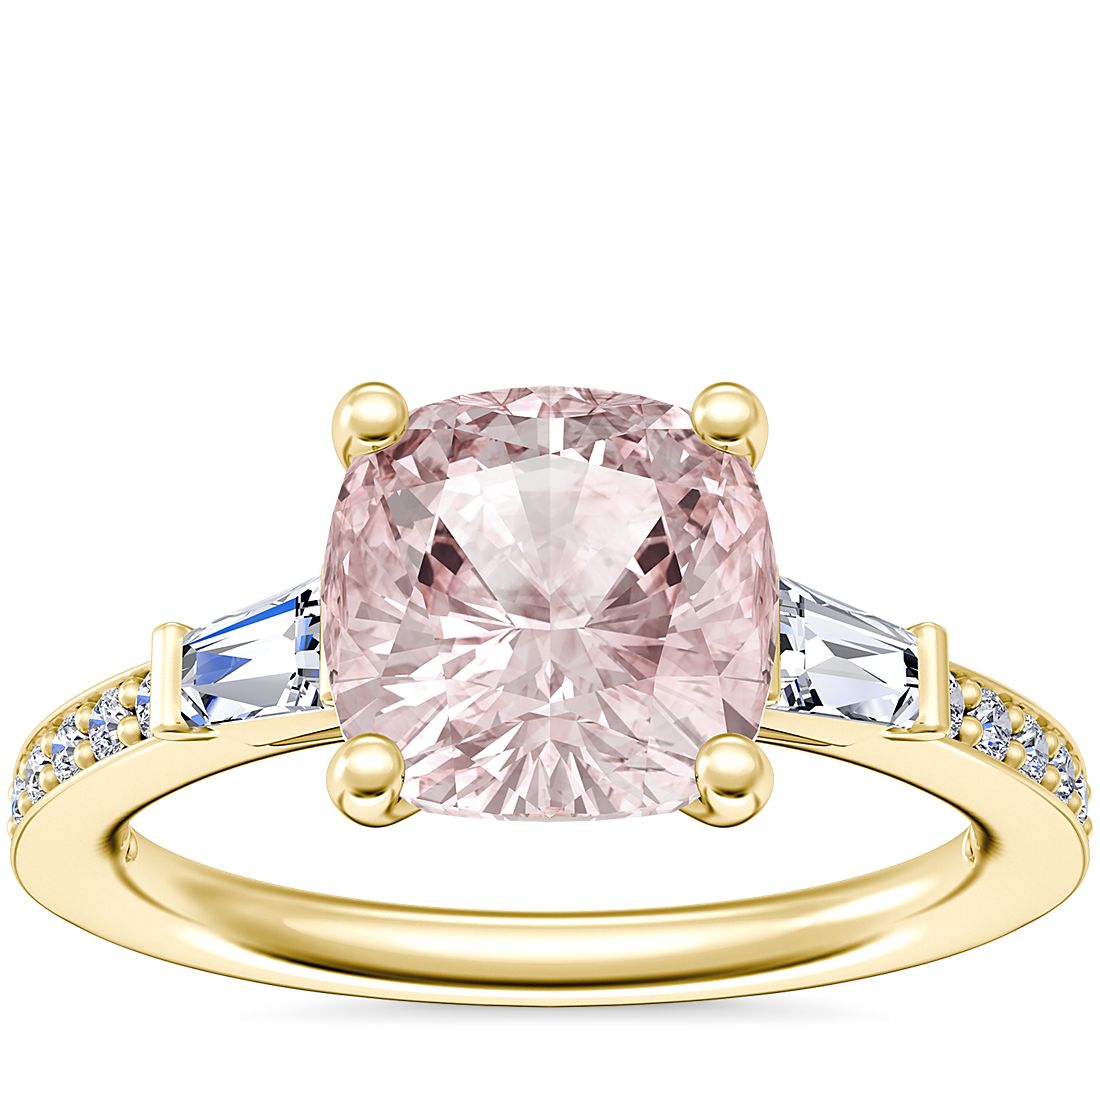 Tapered Baguette Diamond Cathedral Engagement Ring with Cushion Morganite in 14k Yellow Gold (8mm)